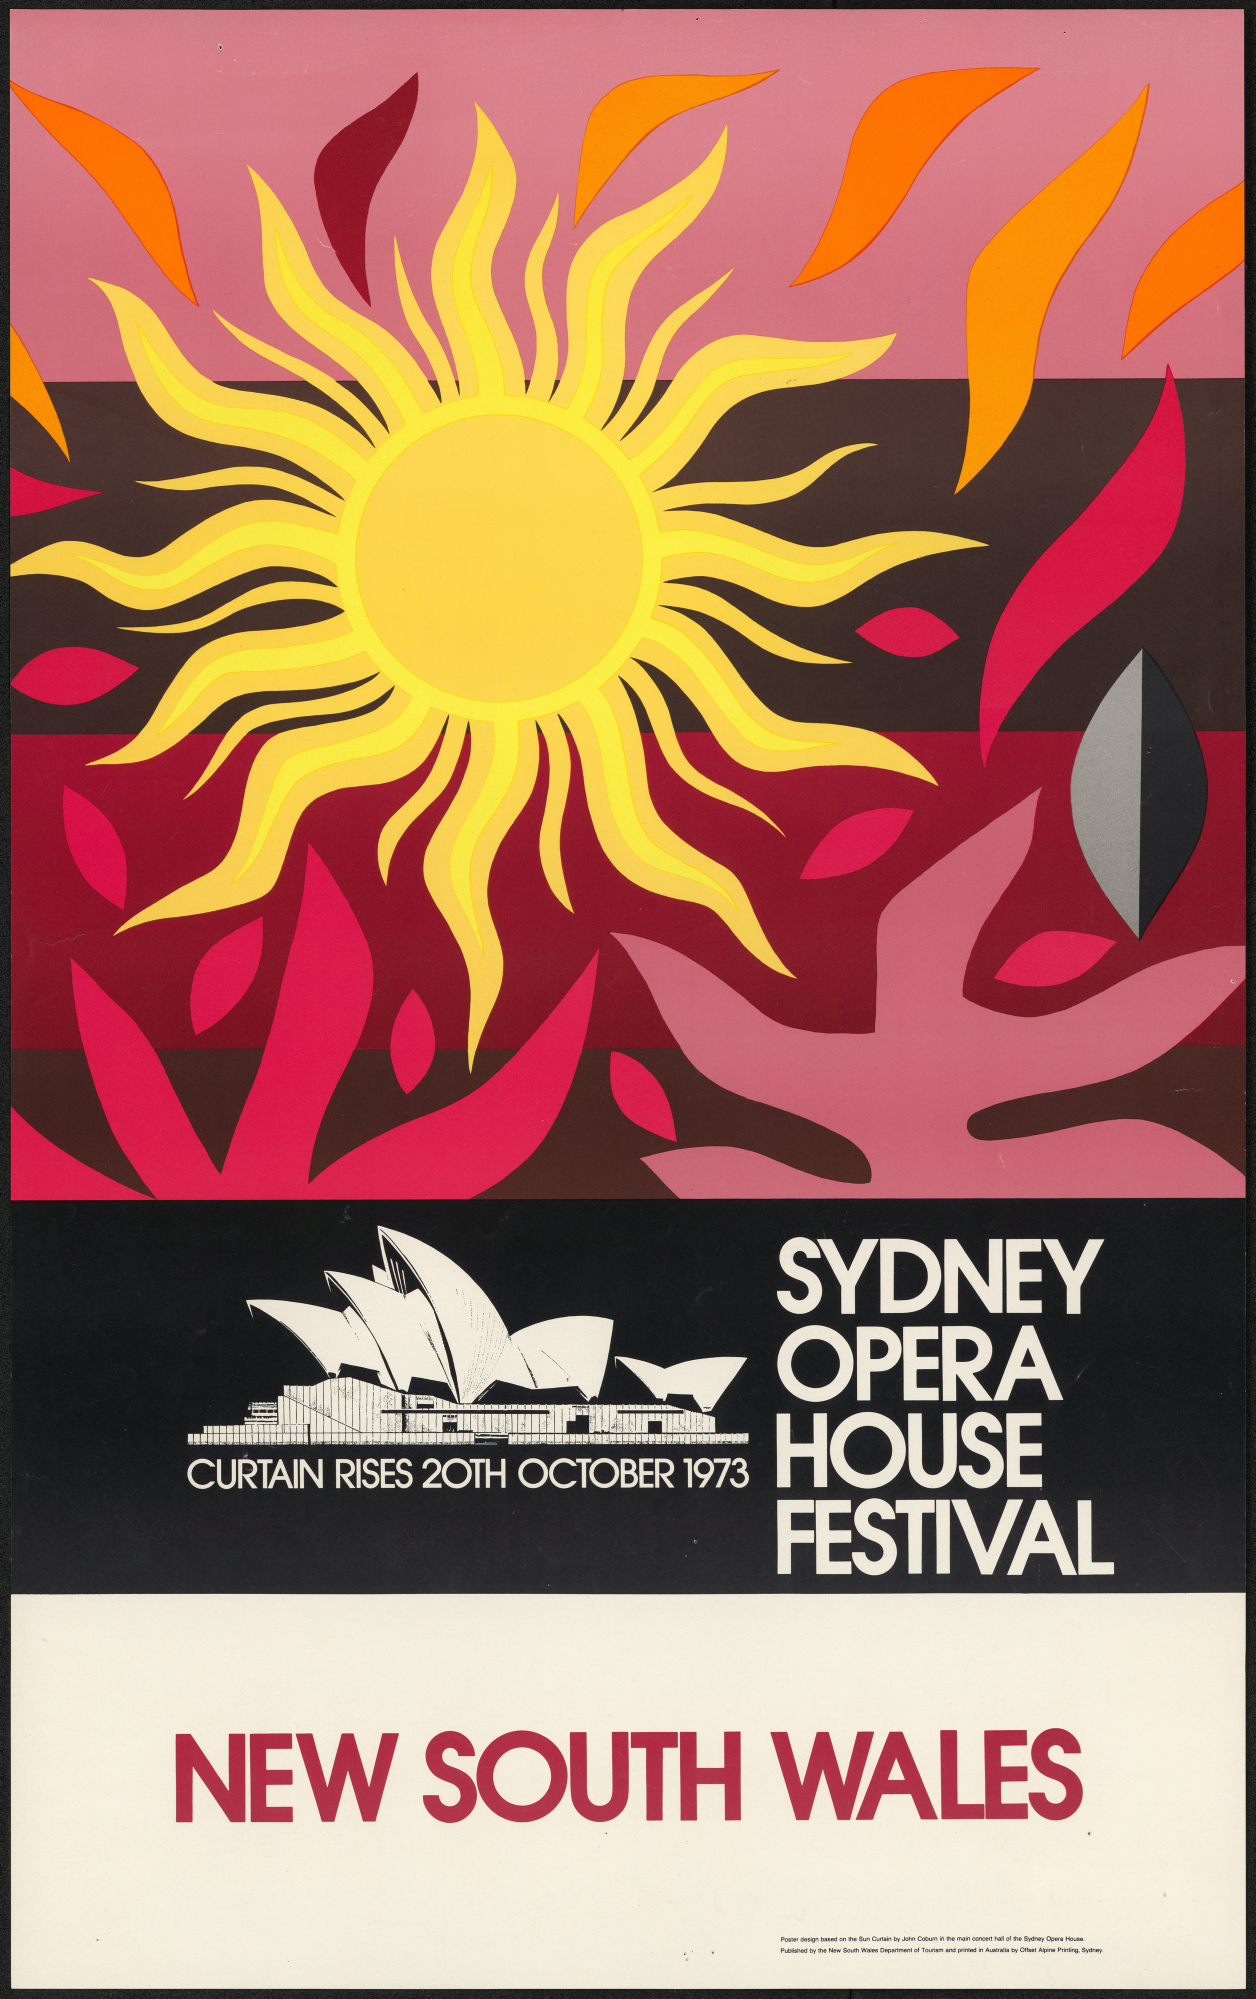 A poster for the Sydney Opera House Festival with a bright yellow sun against red and pink coral illustrations with the Opera House underneath from 1973